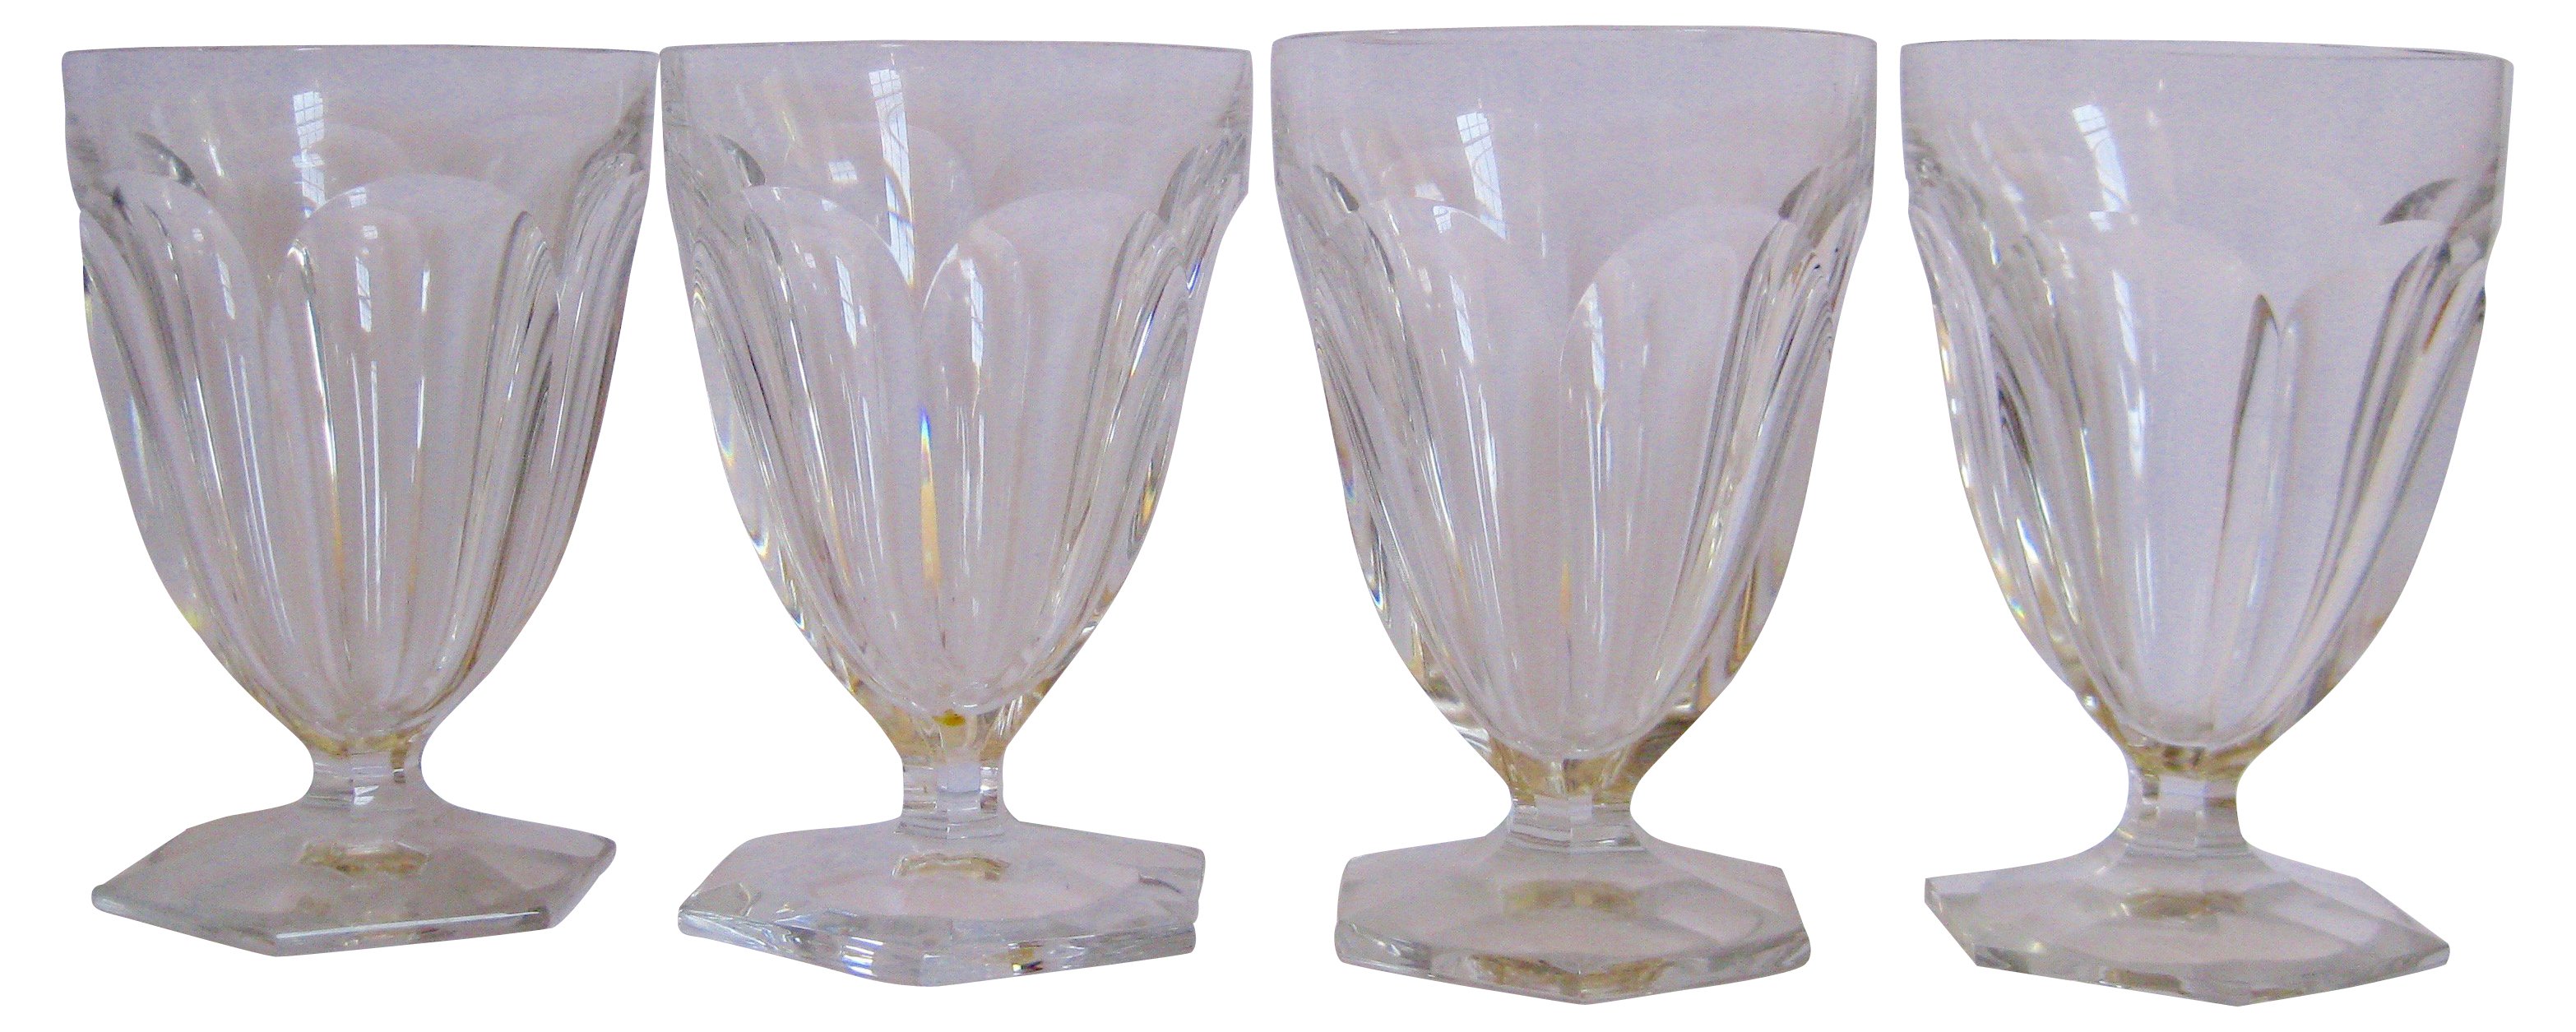 Baccarat French Crystal Glasses, S/4~P77384593